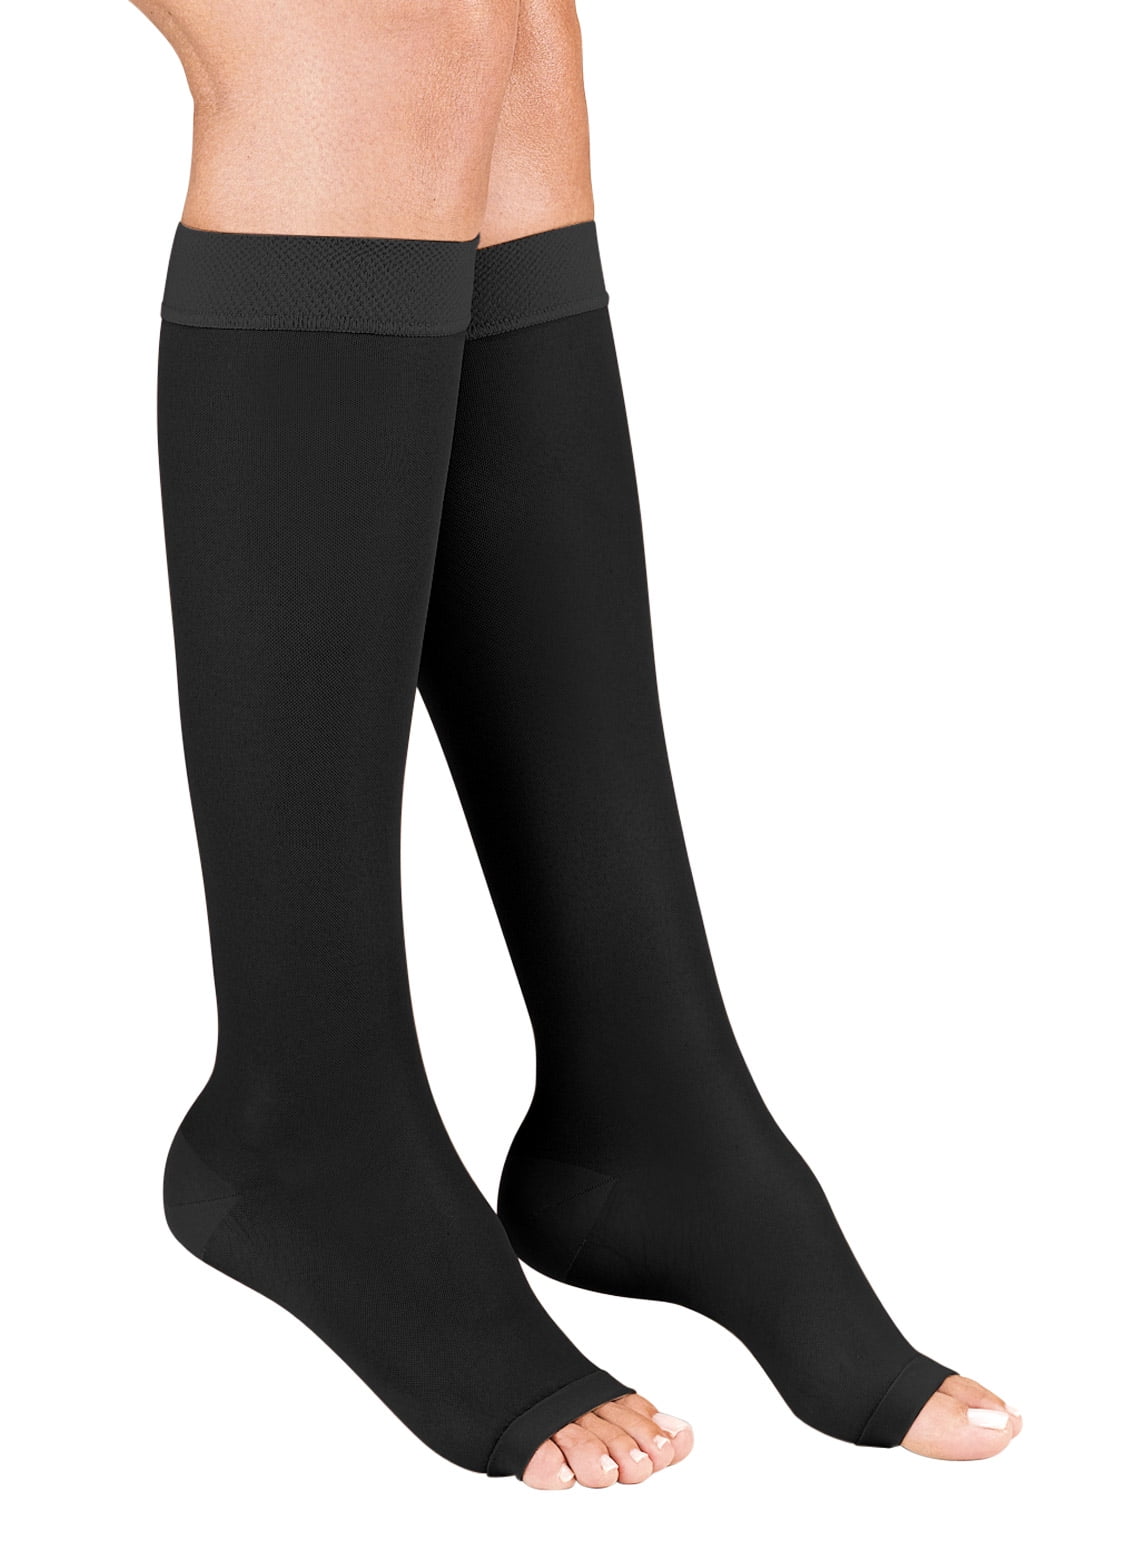 Dr. Leonard?s Open Toe Compression Stockings - Knee - Moderate Support ...